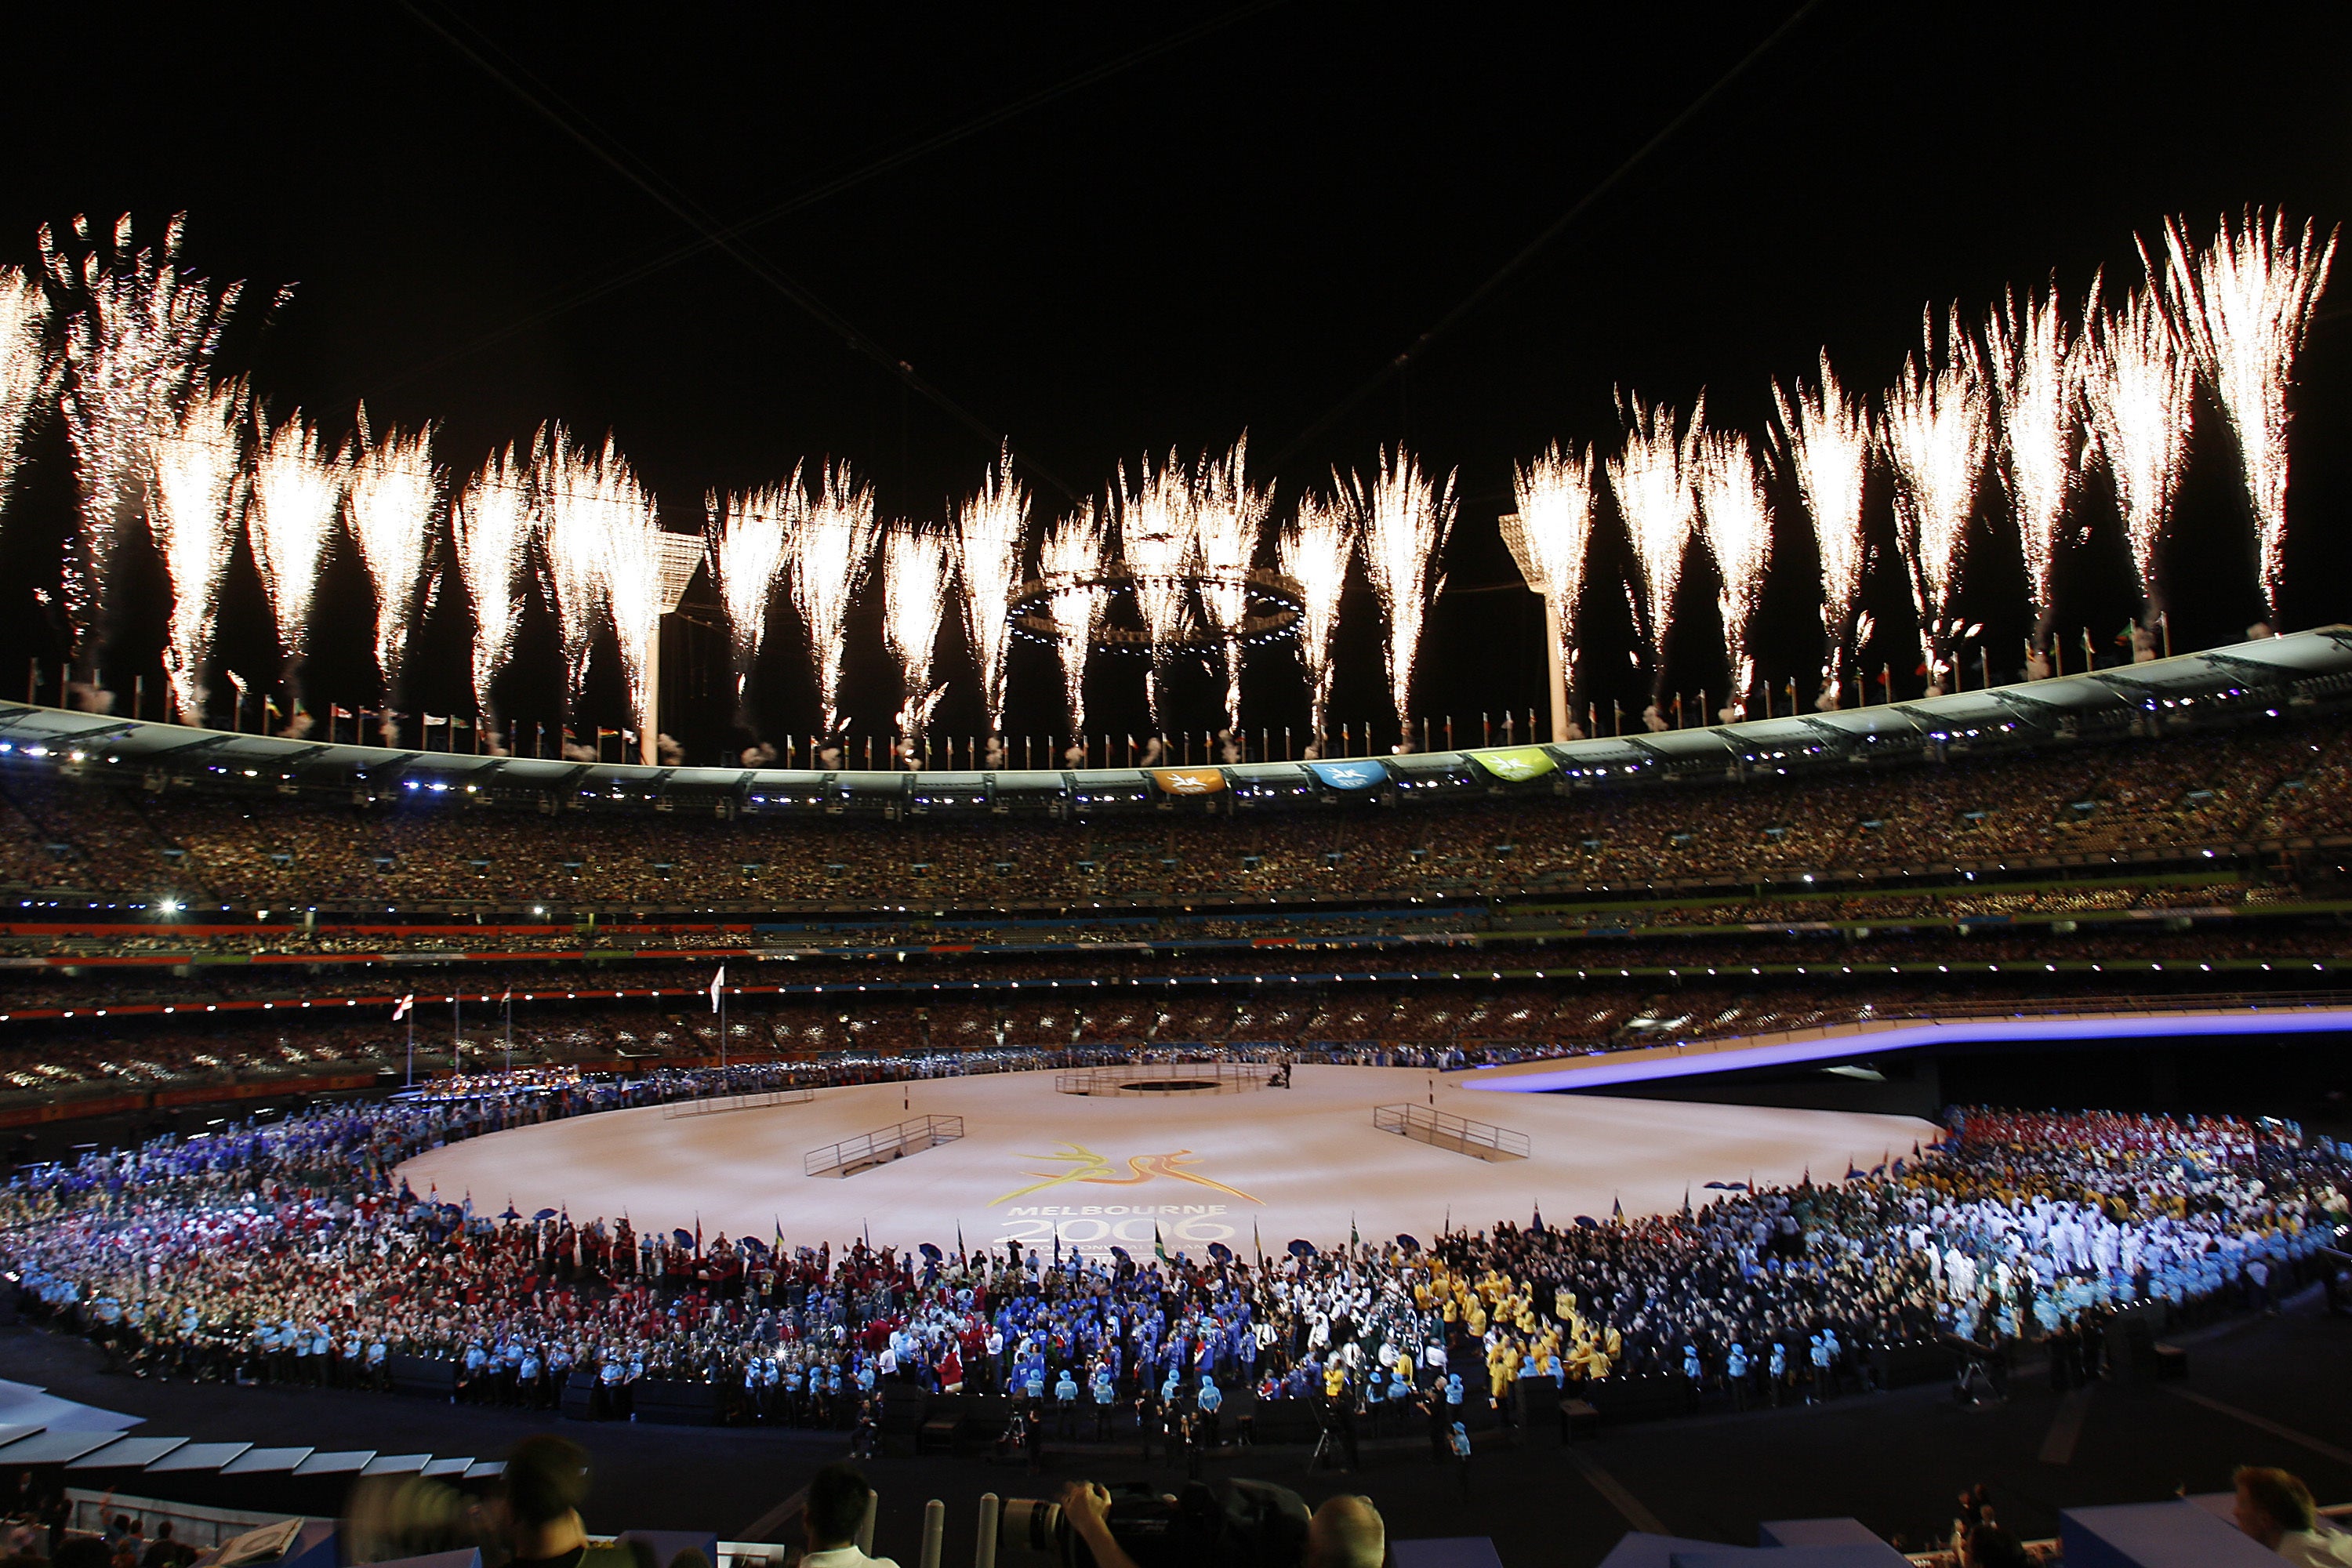 The opening ceremony of Melbourne’s Commonwealth Games in 2006